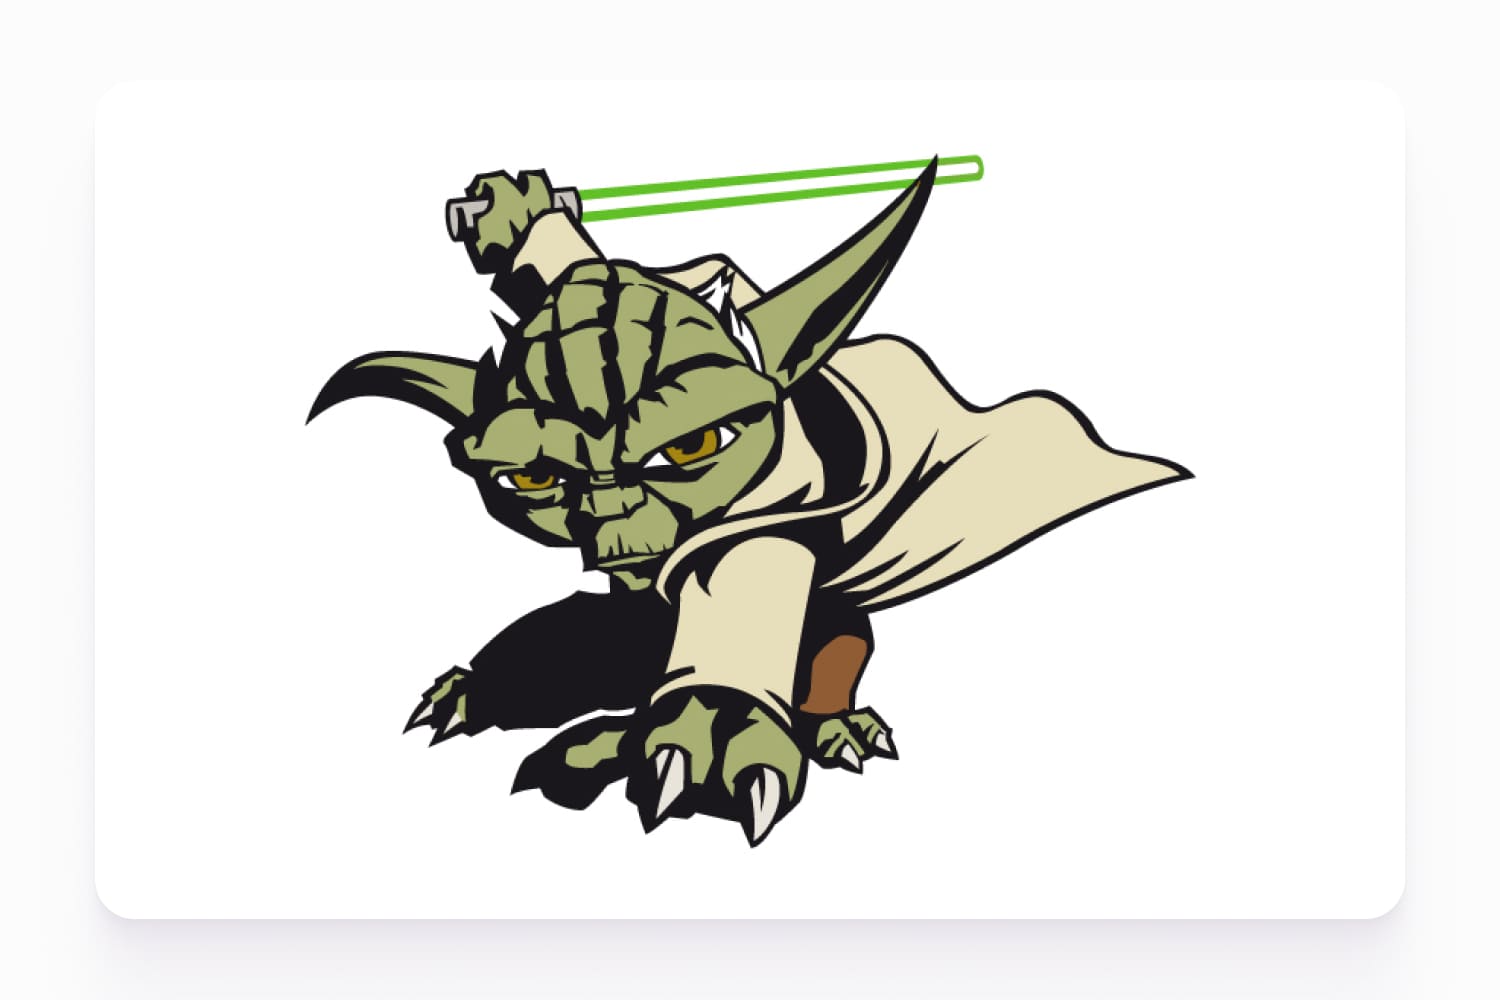 Drawing of Master Yoda with a lightsaber, ready to attack.